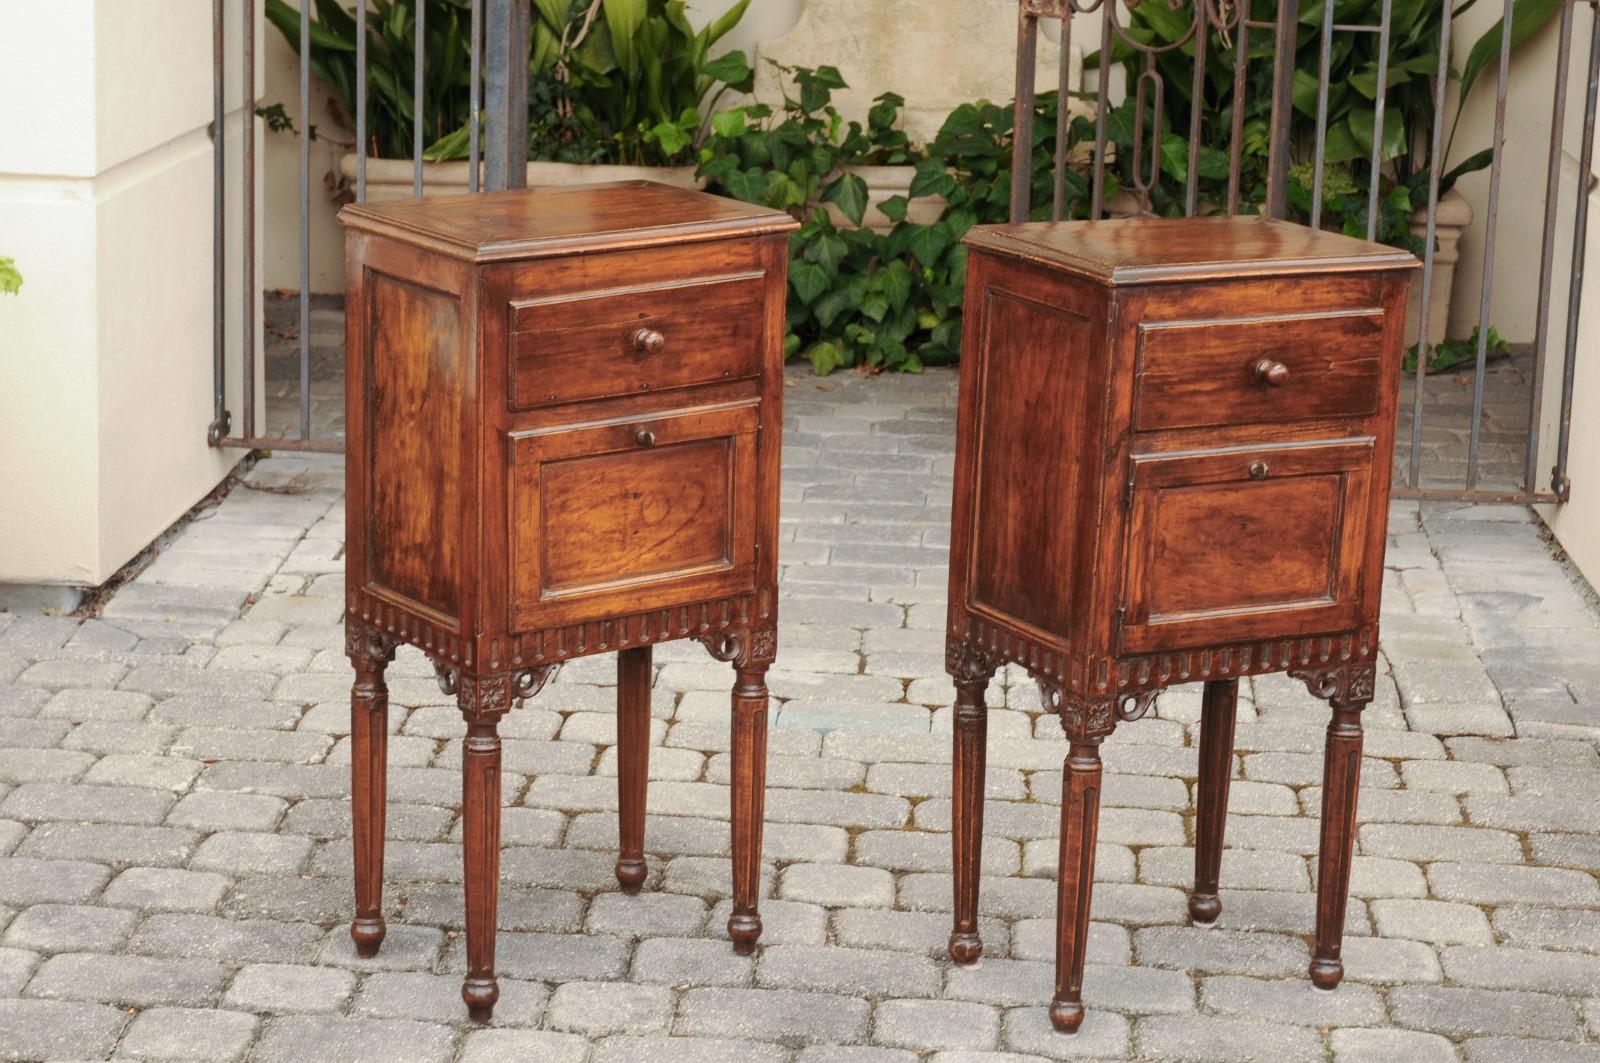 19th Century Pair of Italian Walnut Side Tables circa 1860 with Door, Drawer and Carved Skirt